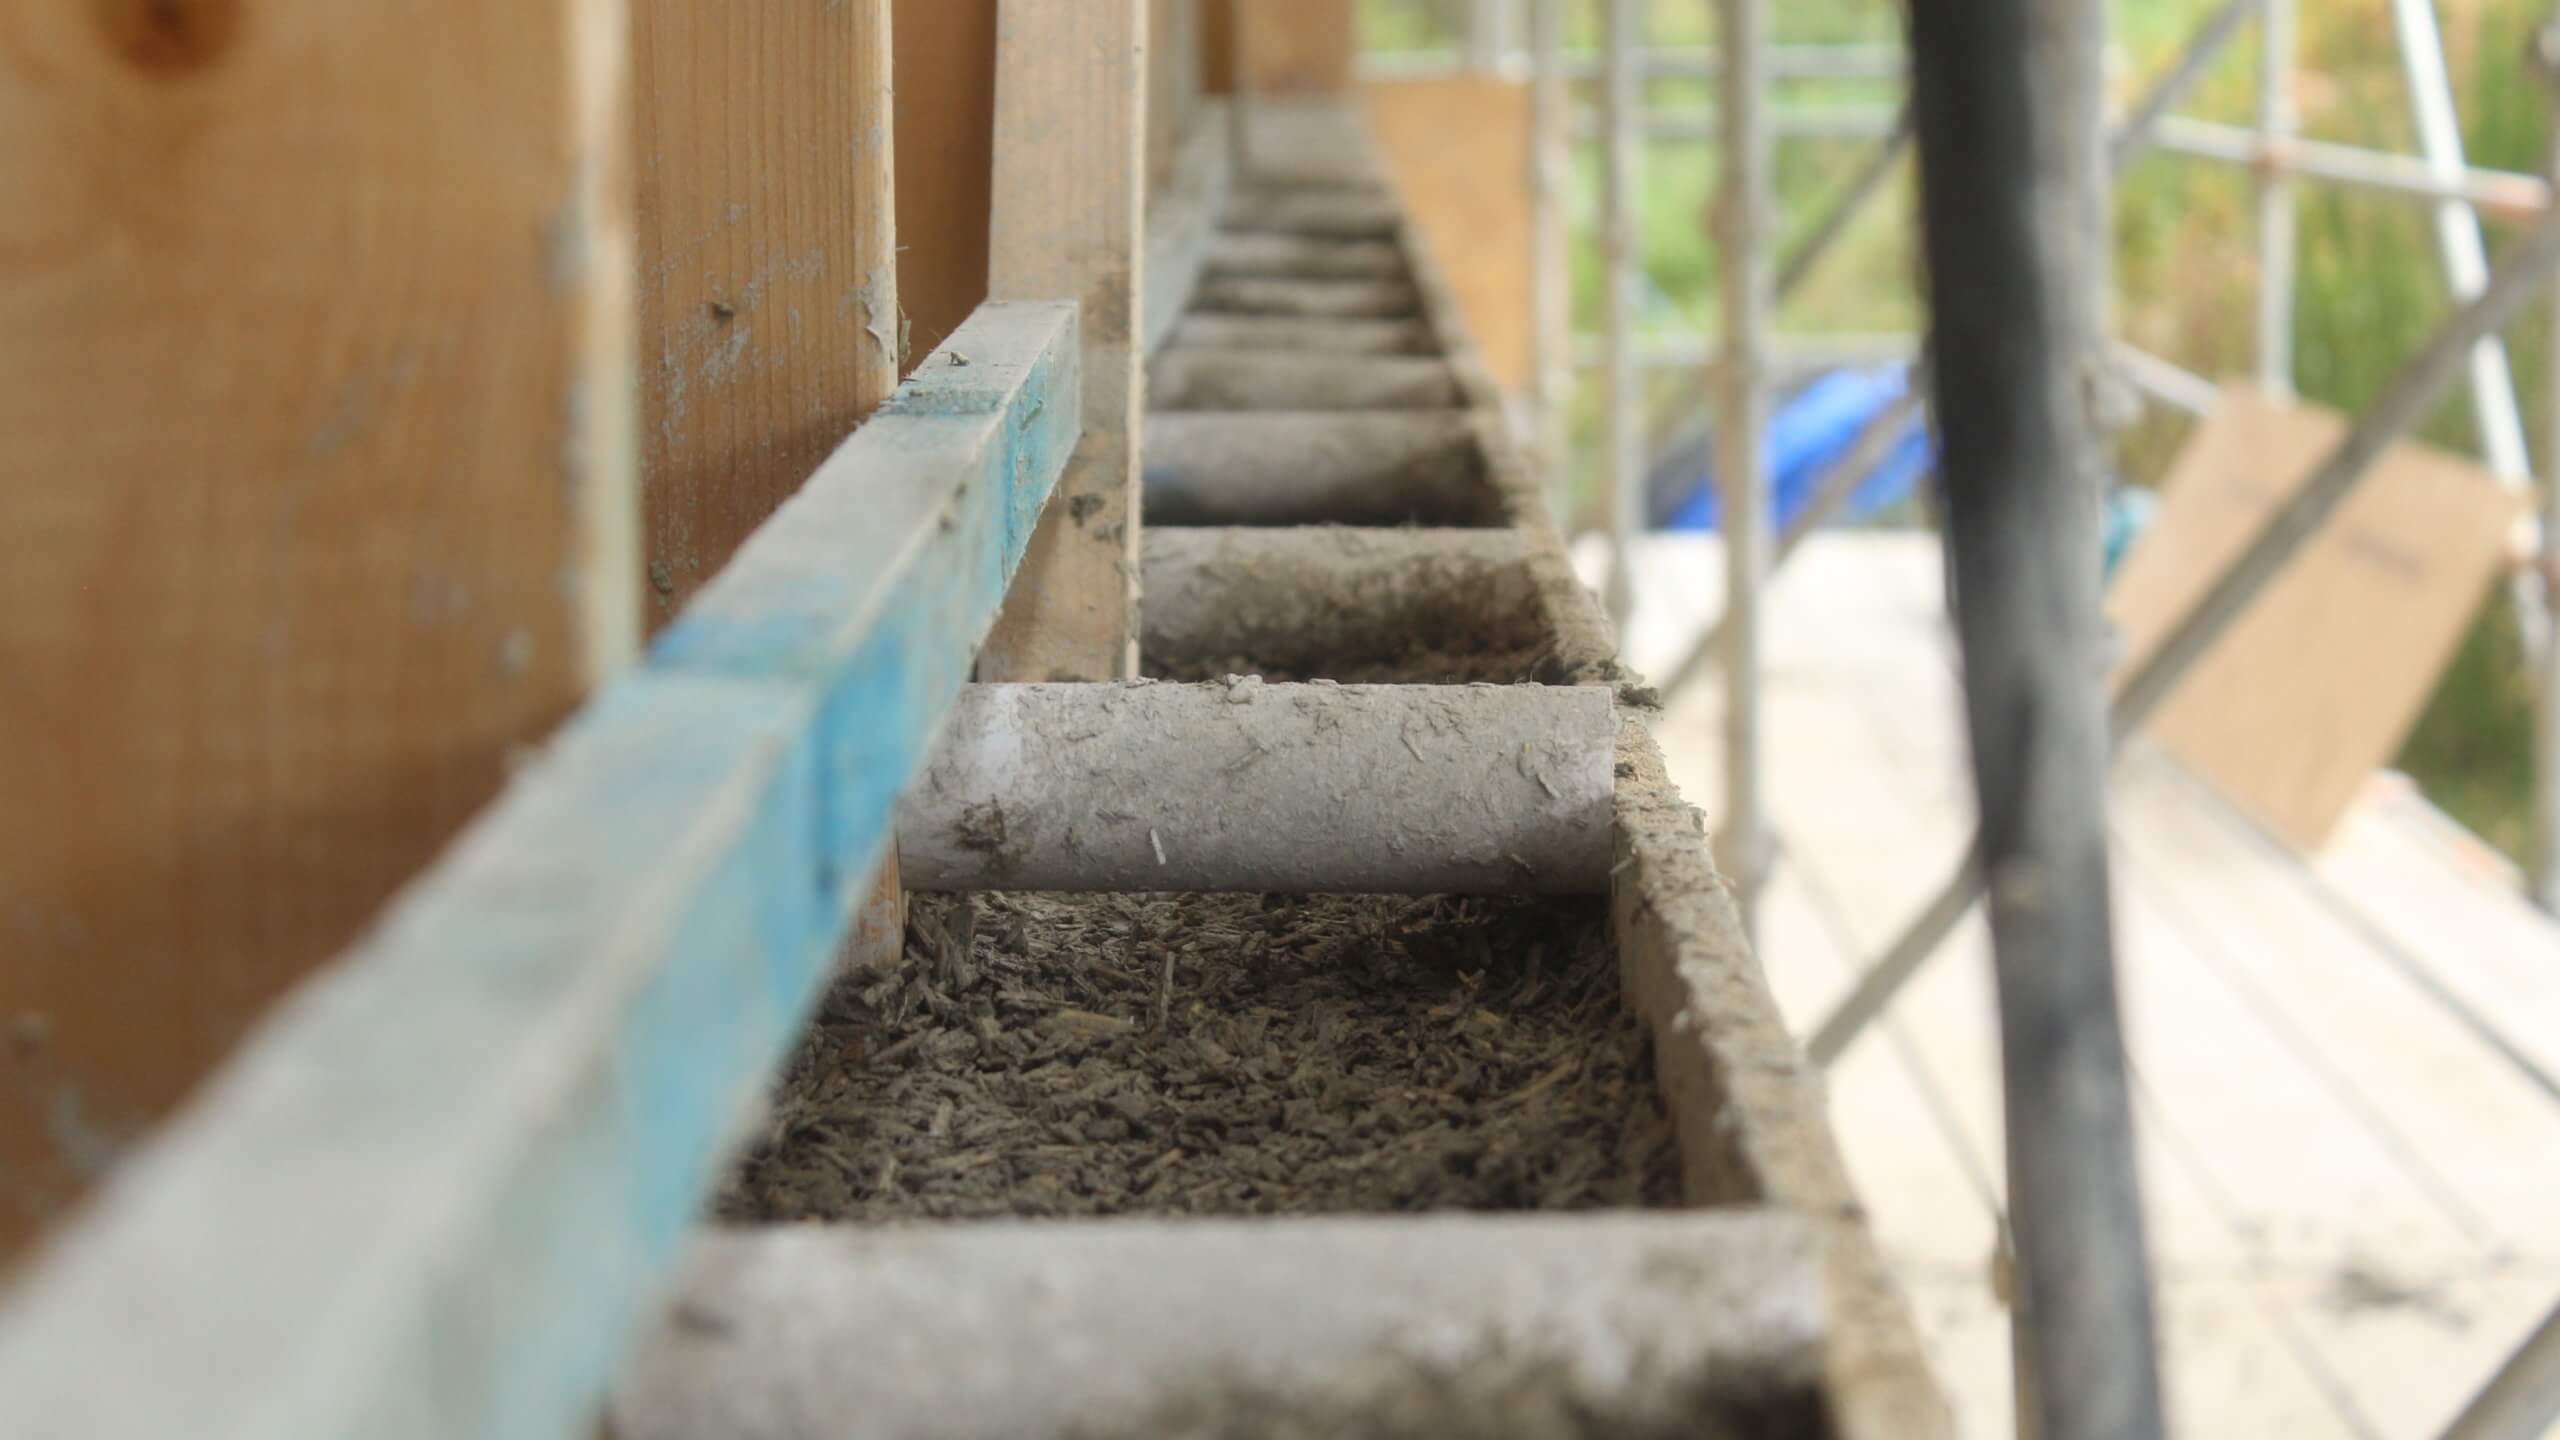 hempcrete wall with plastic spacers setting position of OSB shuttering. Horizontal treated timber rail against timber frame for hempcrete to wrap around